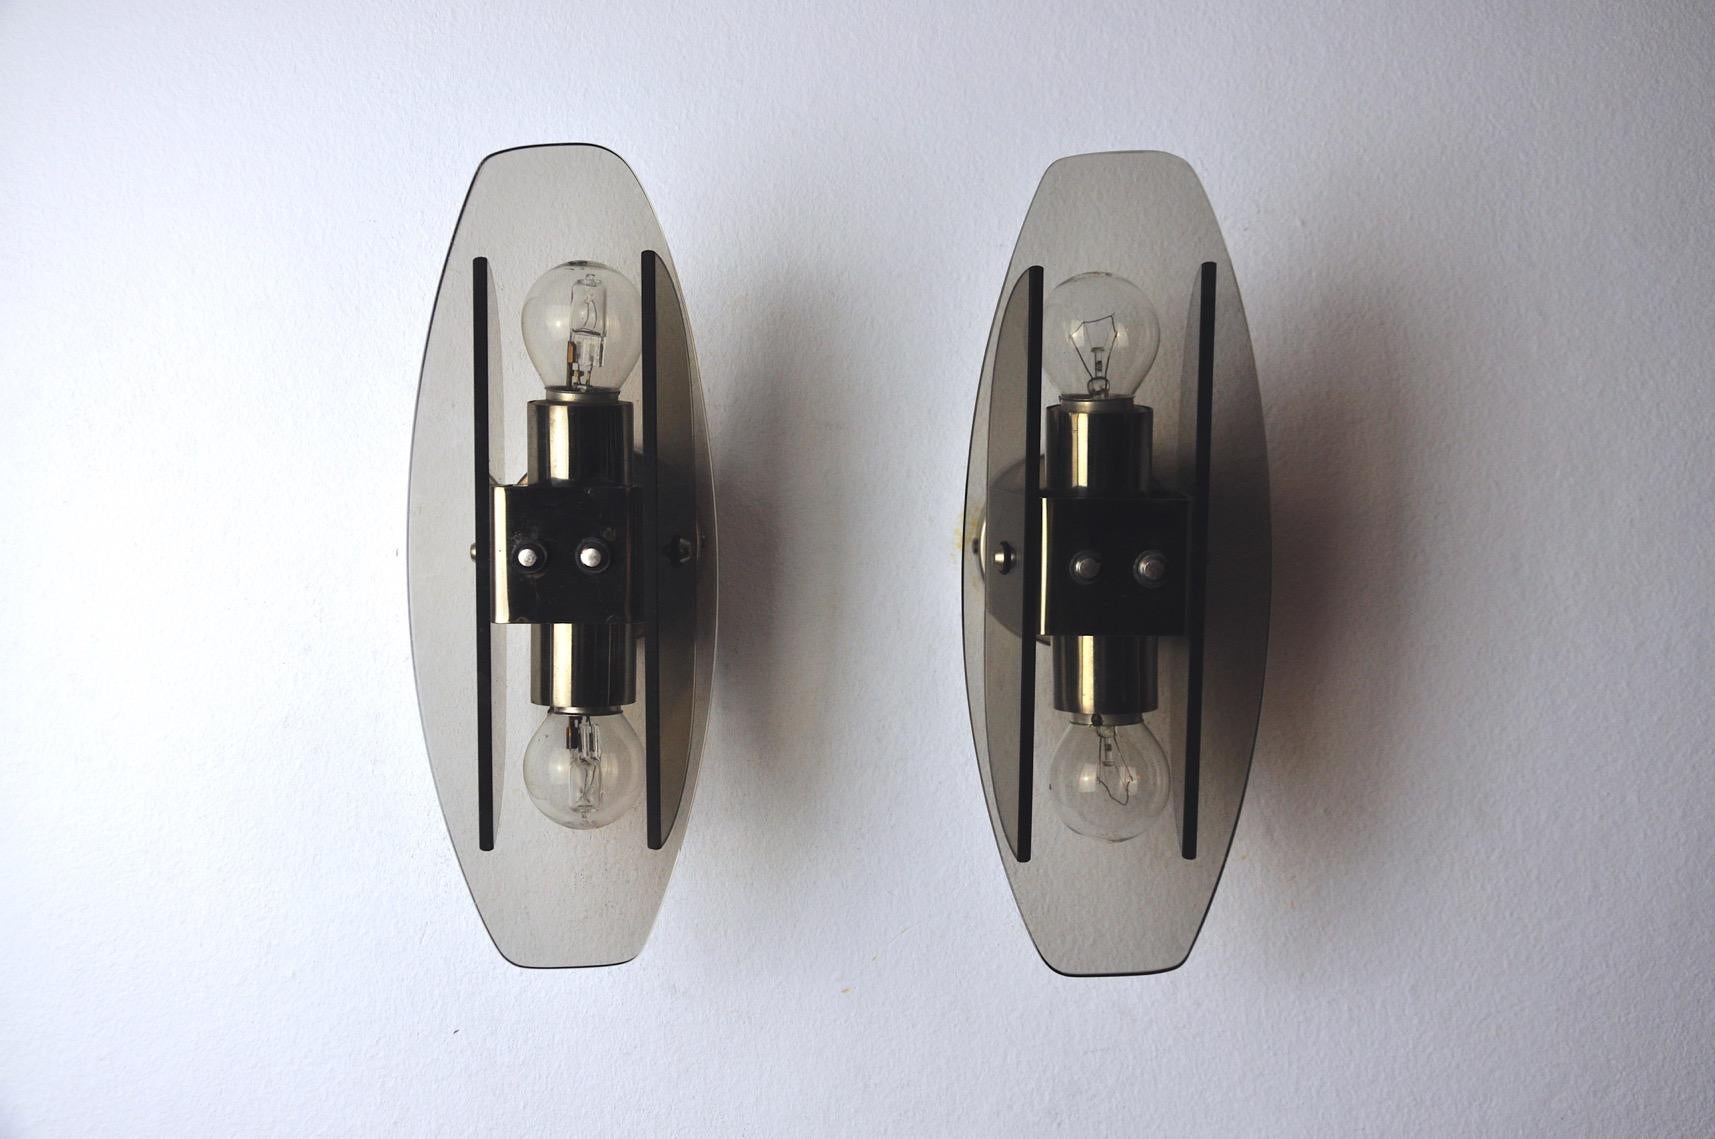 Very nice pair of veca wall lights produced in italy in the 70s. Wall lights composed of cut glass plates and a chrome structure. Unique object that will illuminate wonderfully and bring a real design touch to your interior. Electricity checked,